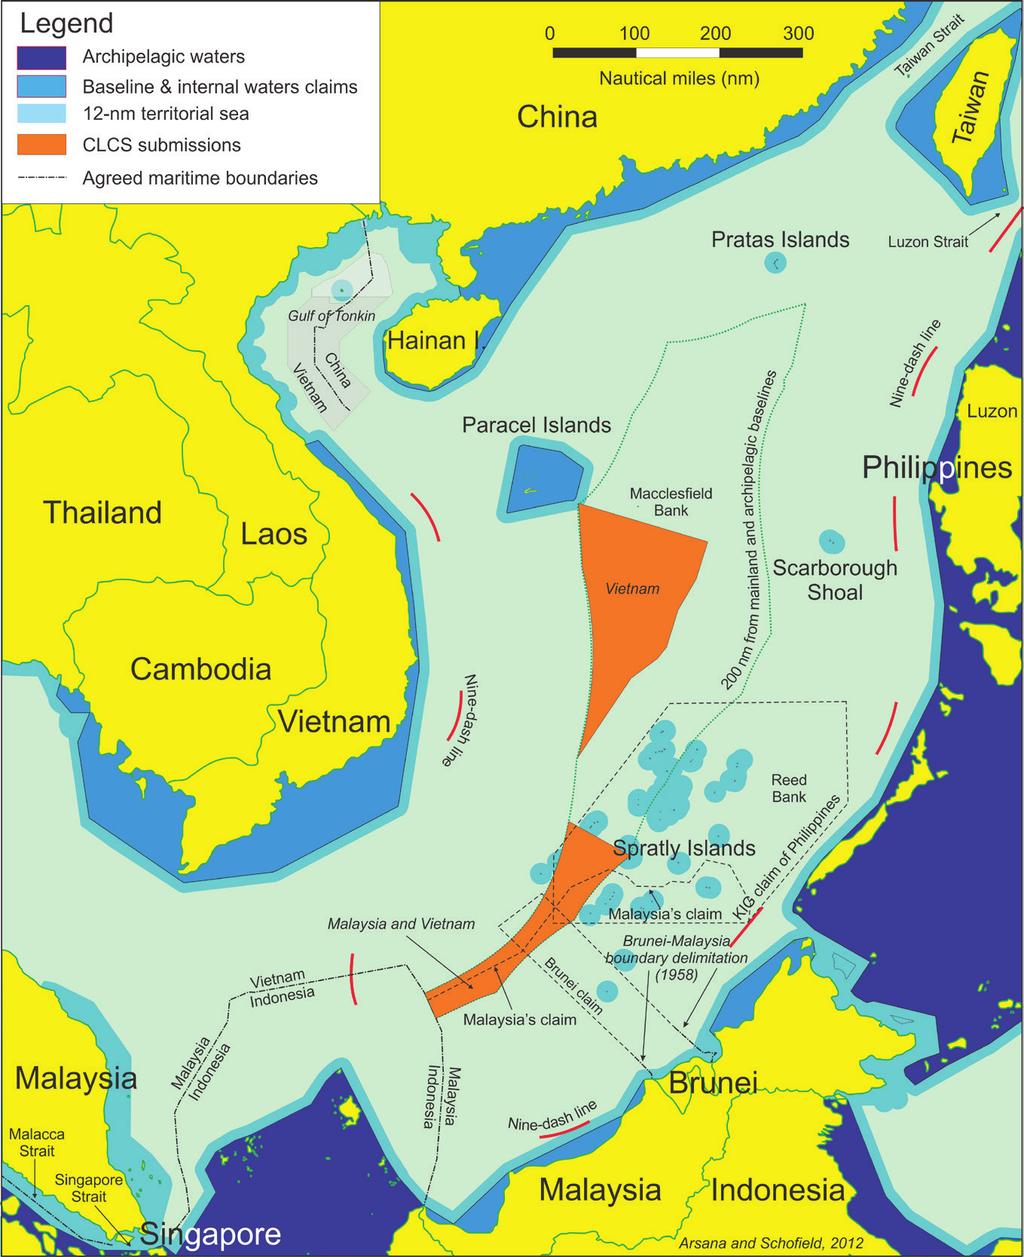 defining eez claims from islands 199 figure 1 Baselines and maritime claims in the South China Sea Source: Adapted from a map included in the January 2013 issue of the American Journal of